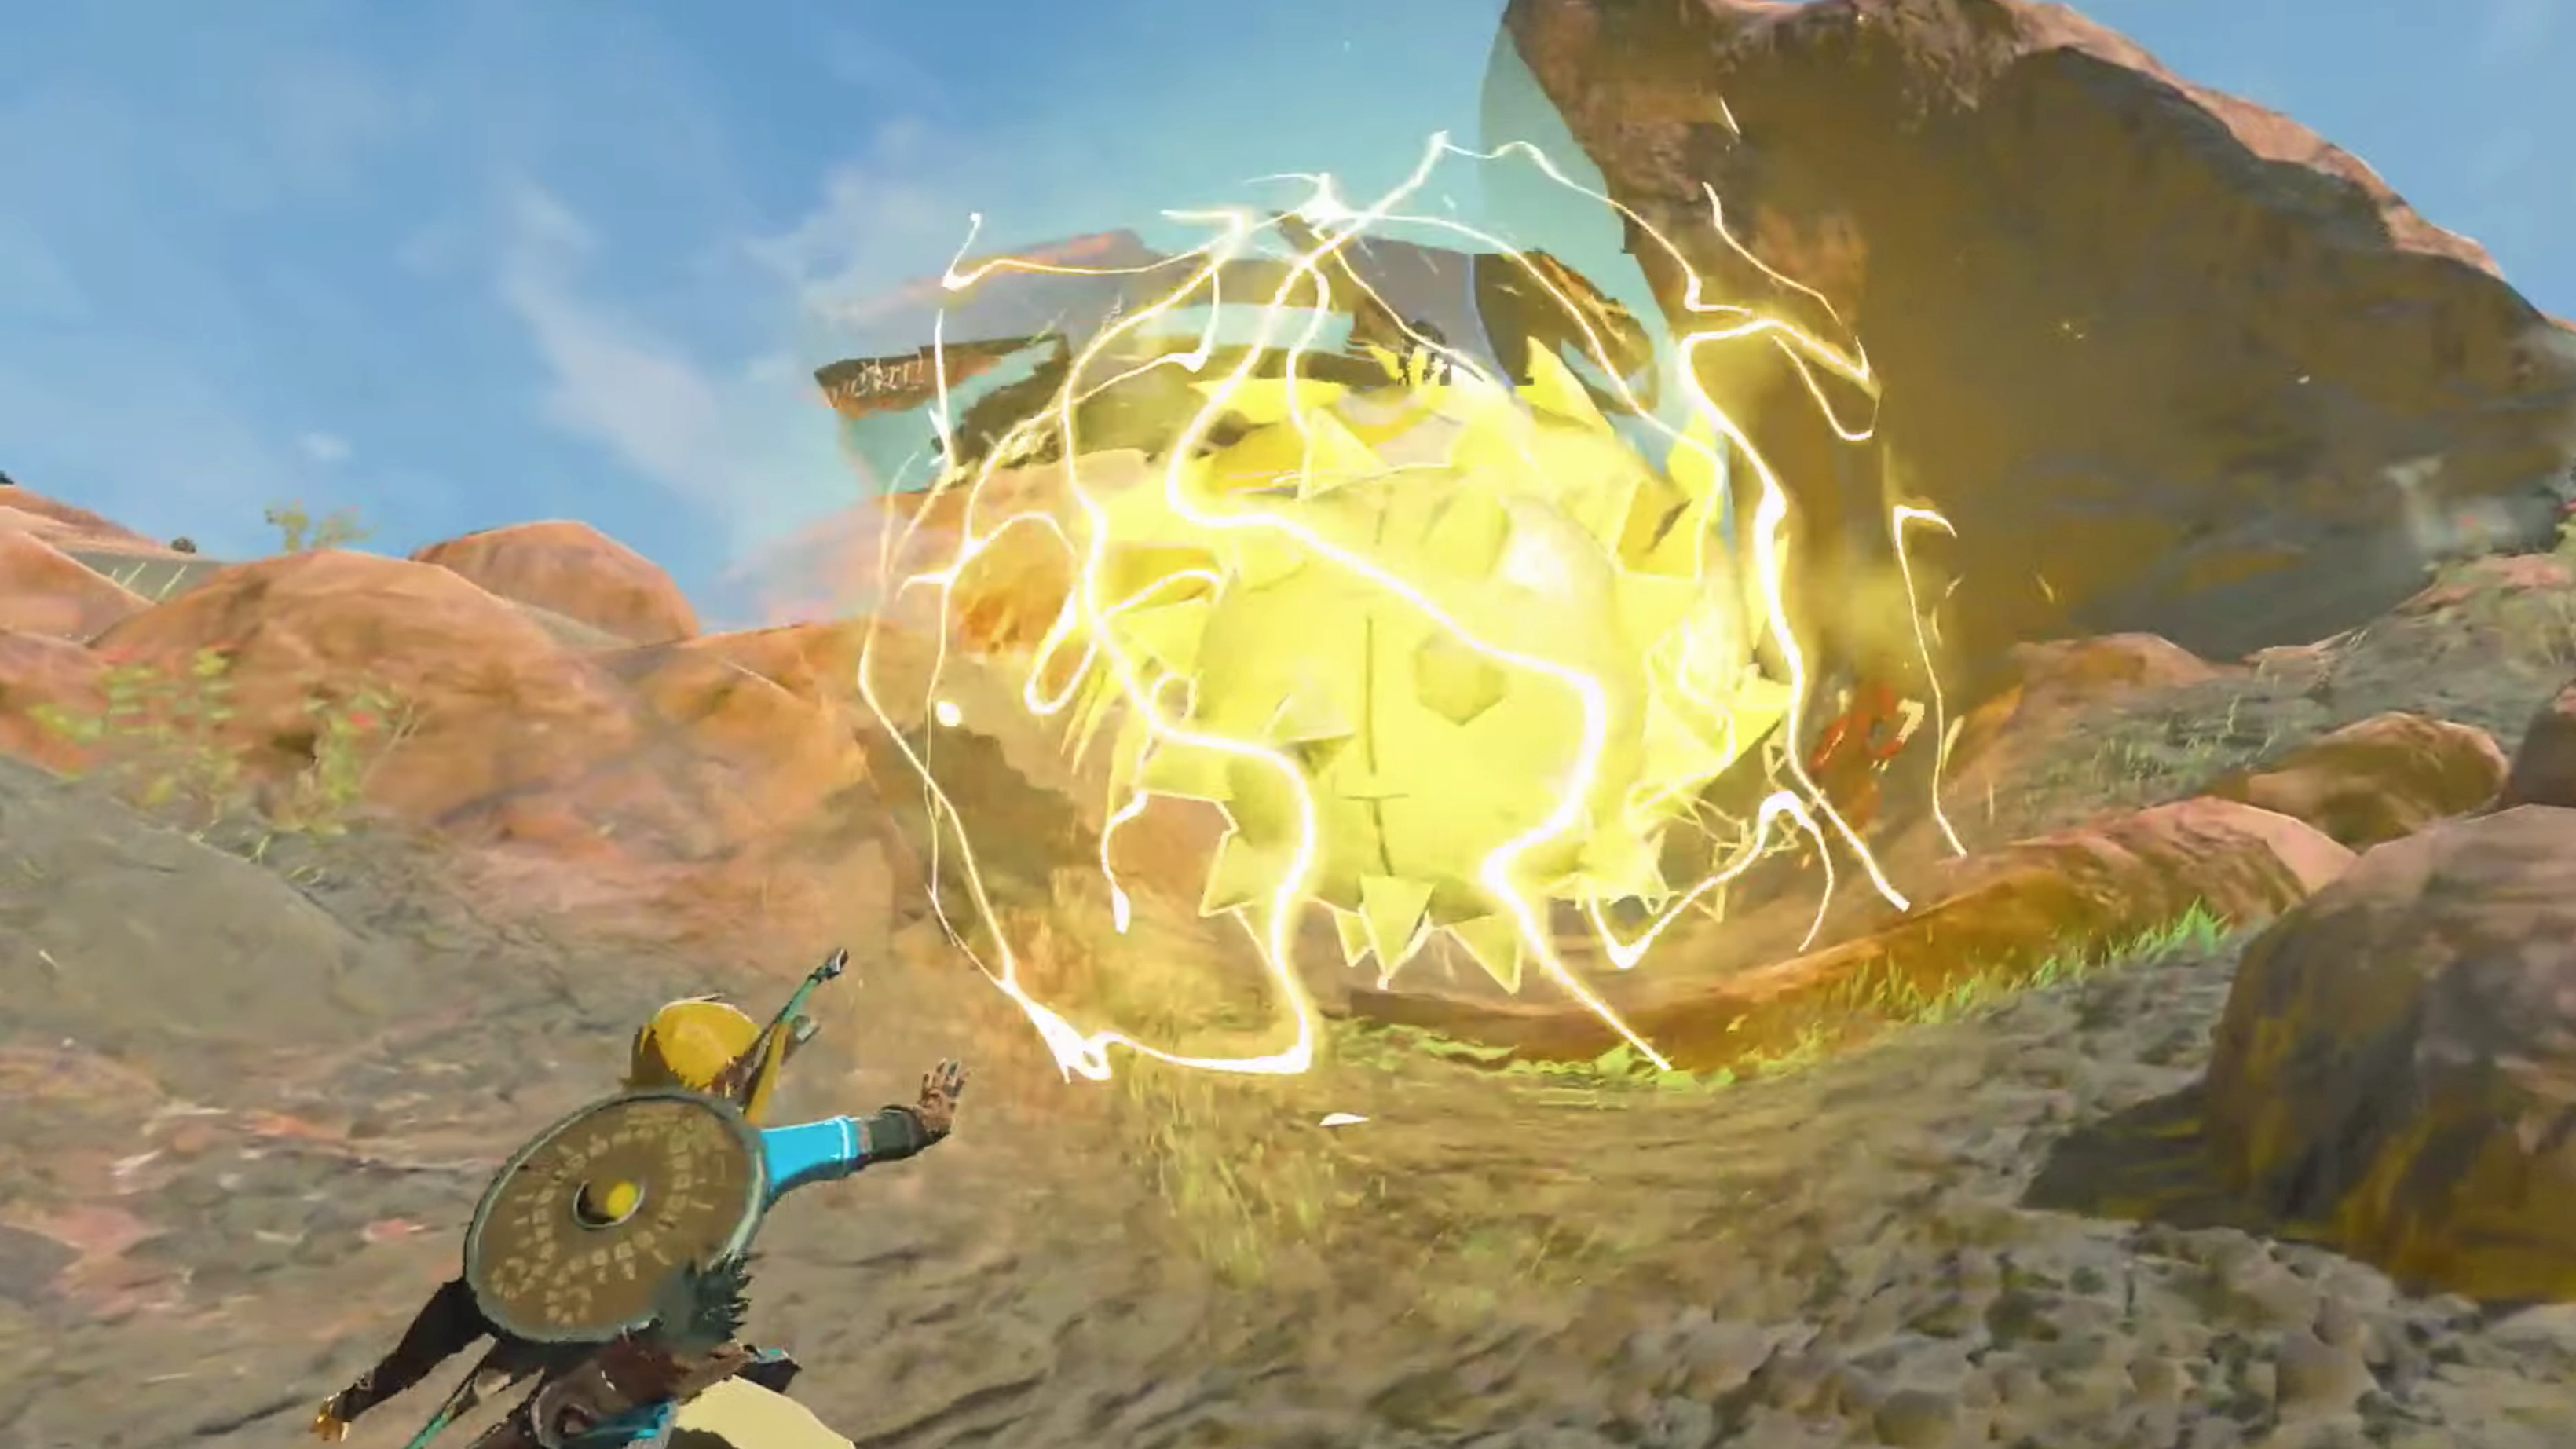 Breath of the Wild 2 trailer screenshot showing Link using his power